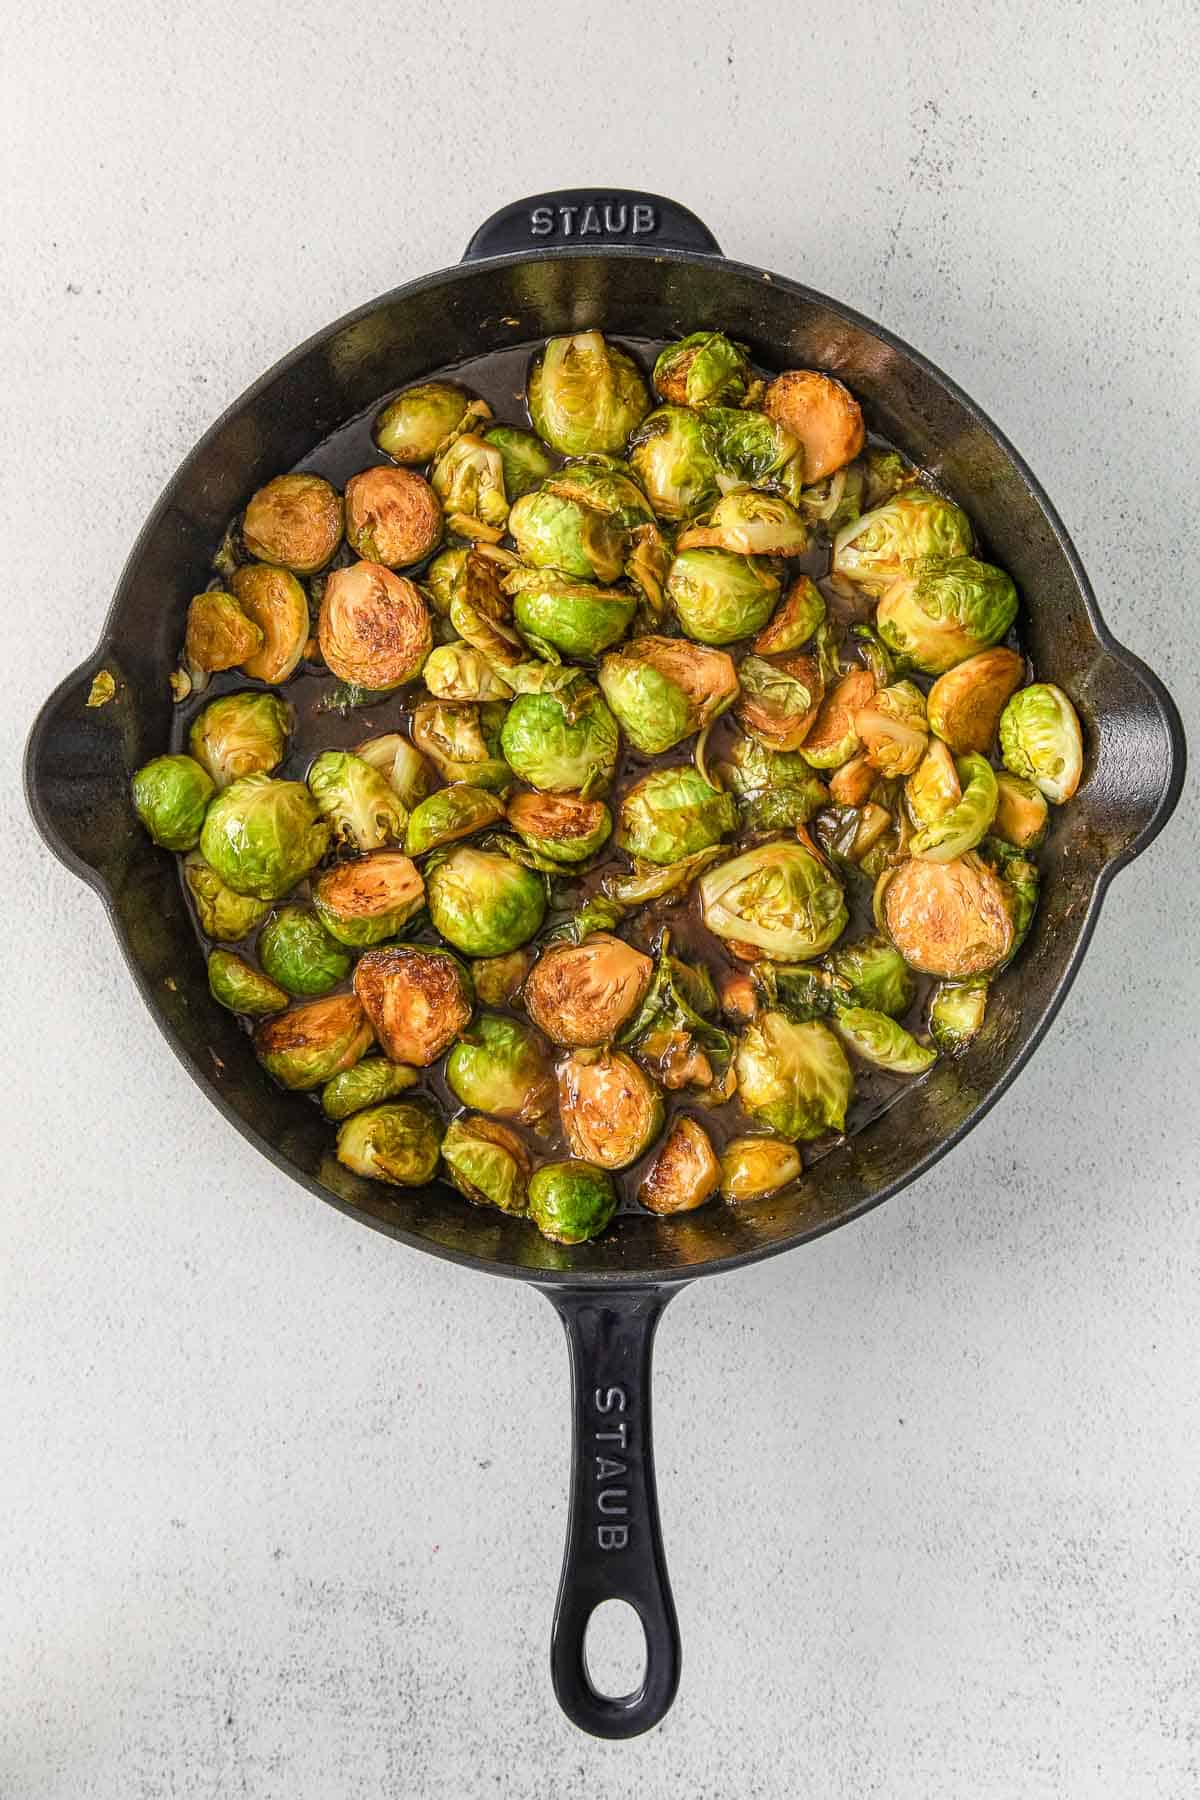 Iron skillet with brussel sprout cooking.